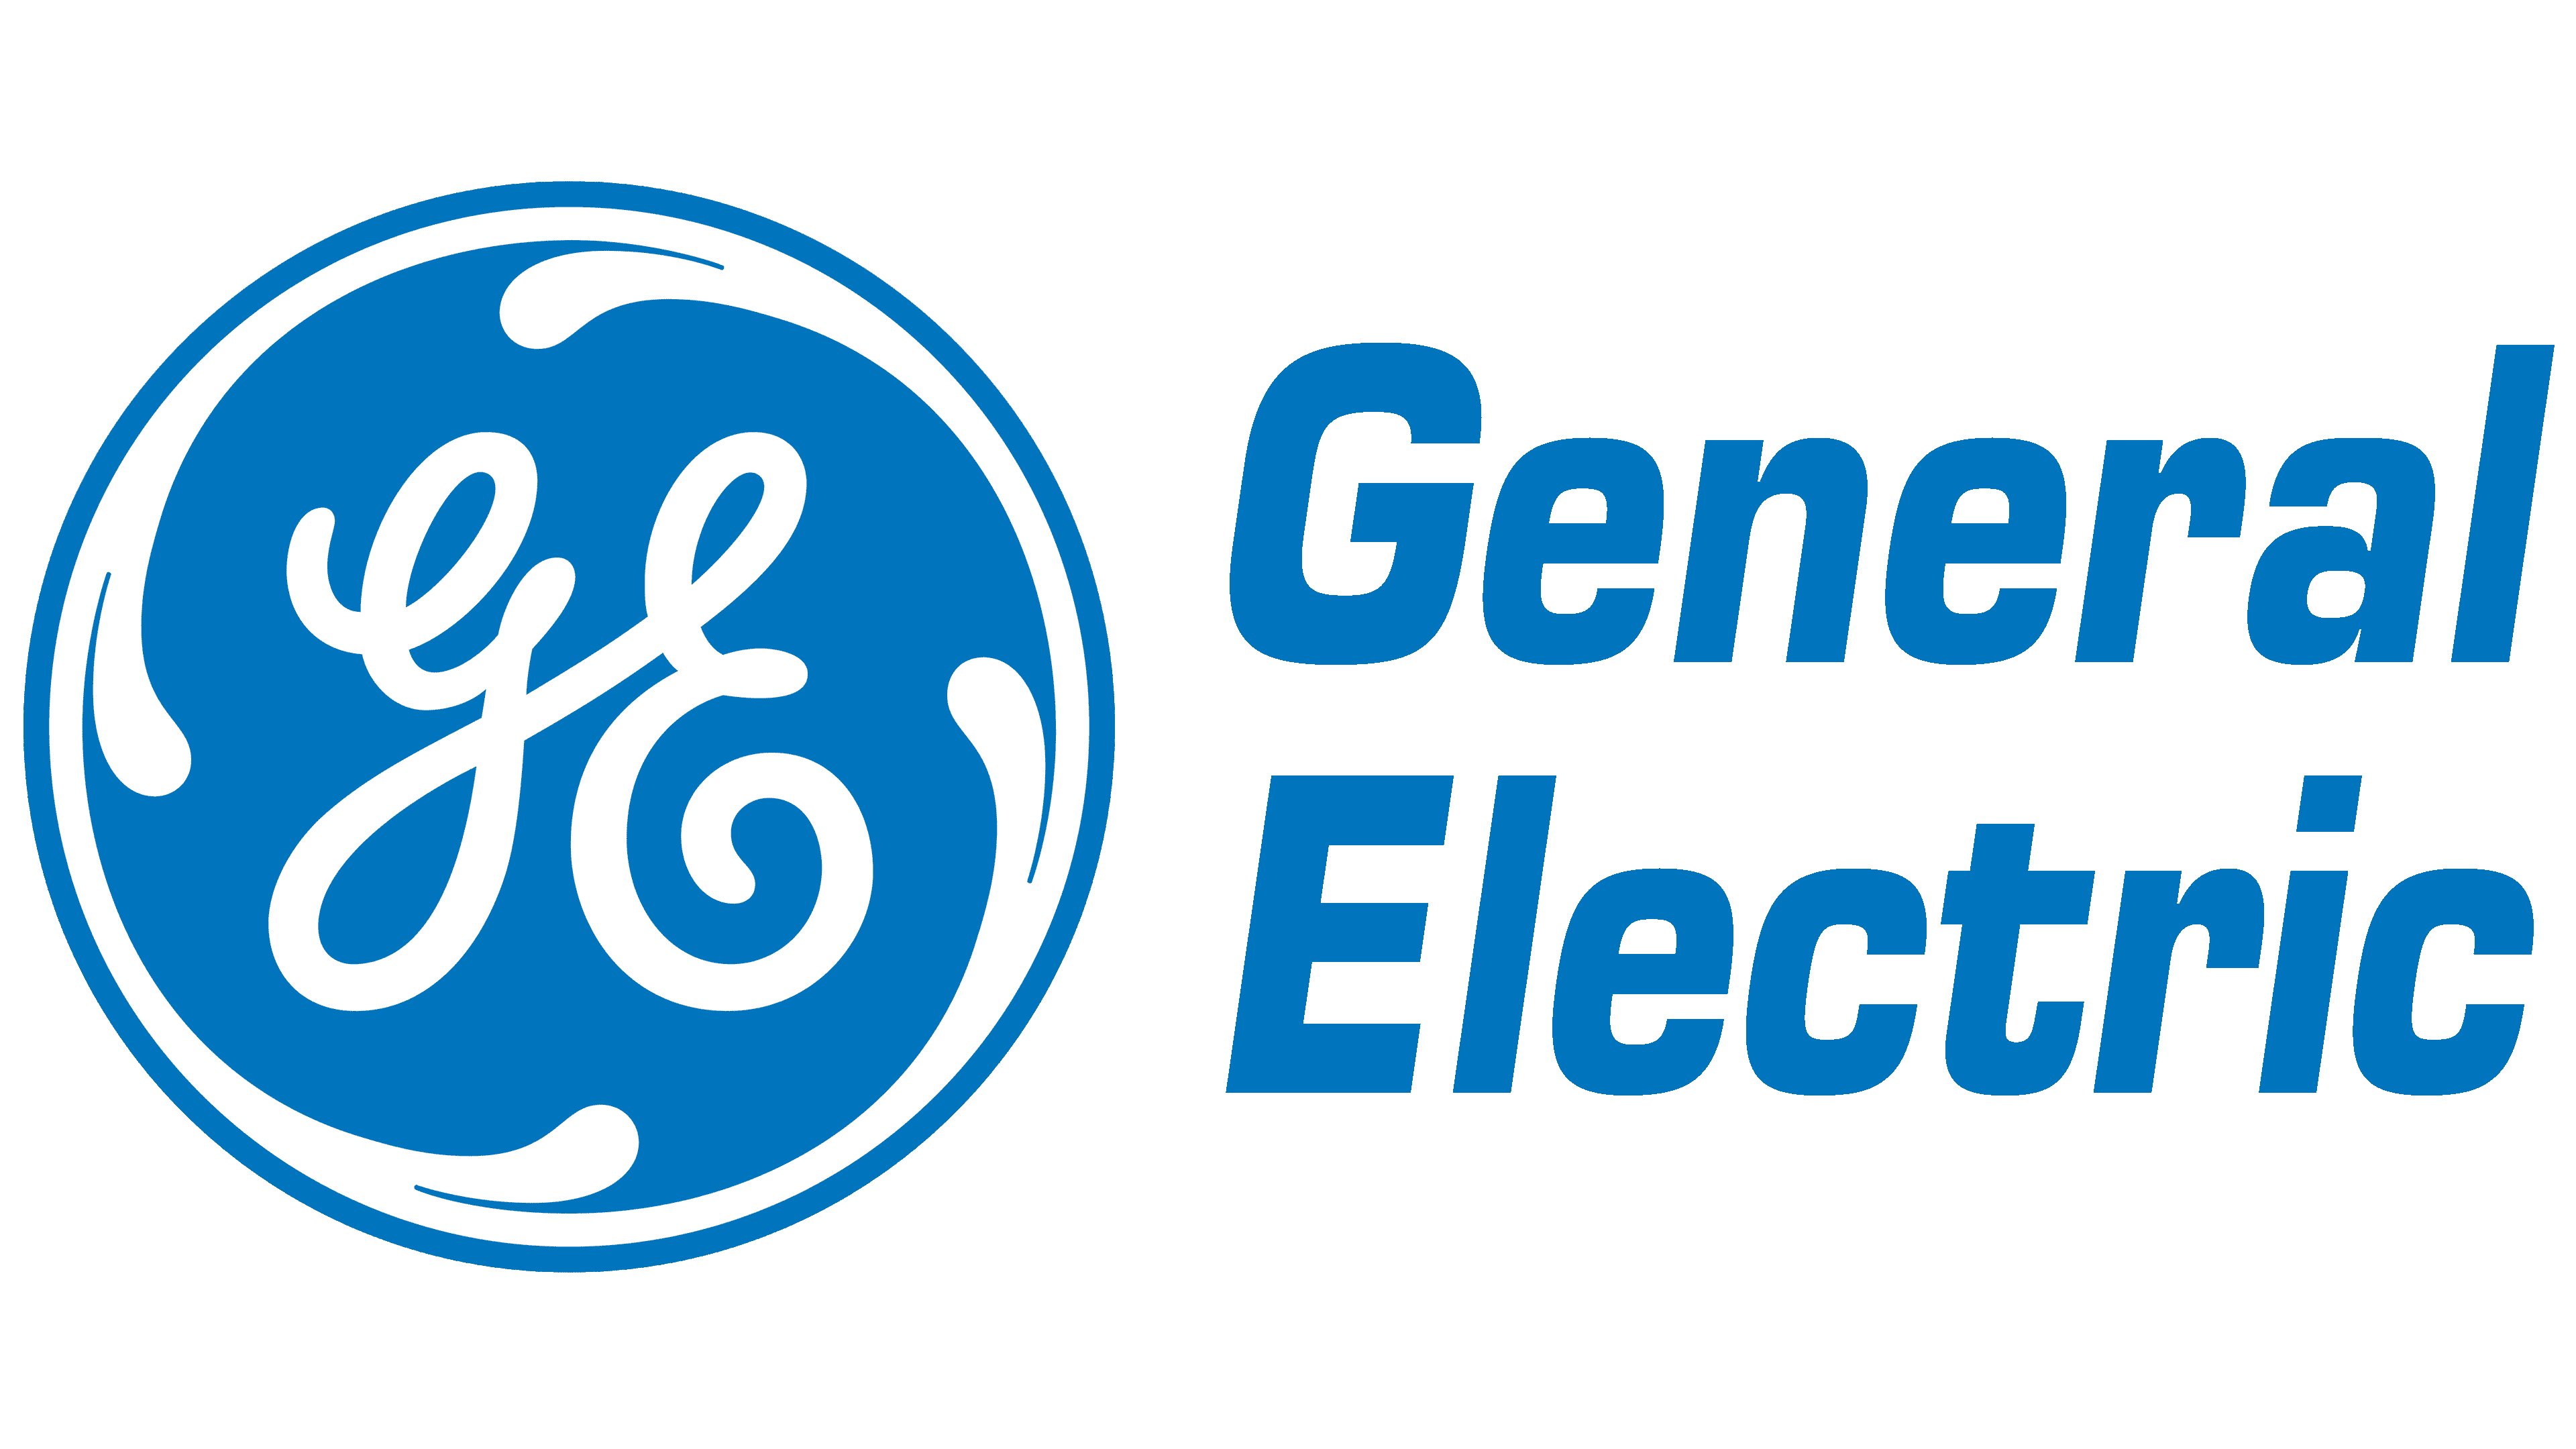 General Electric Image